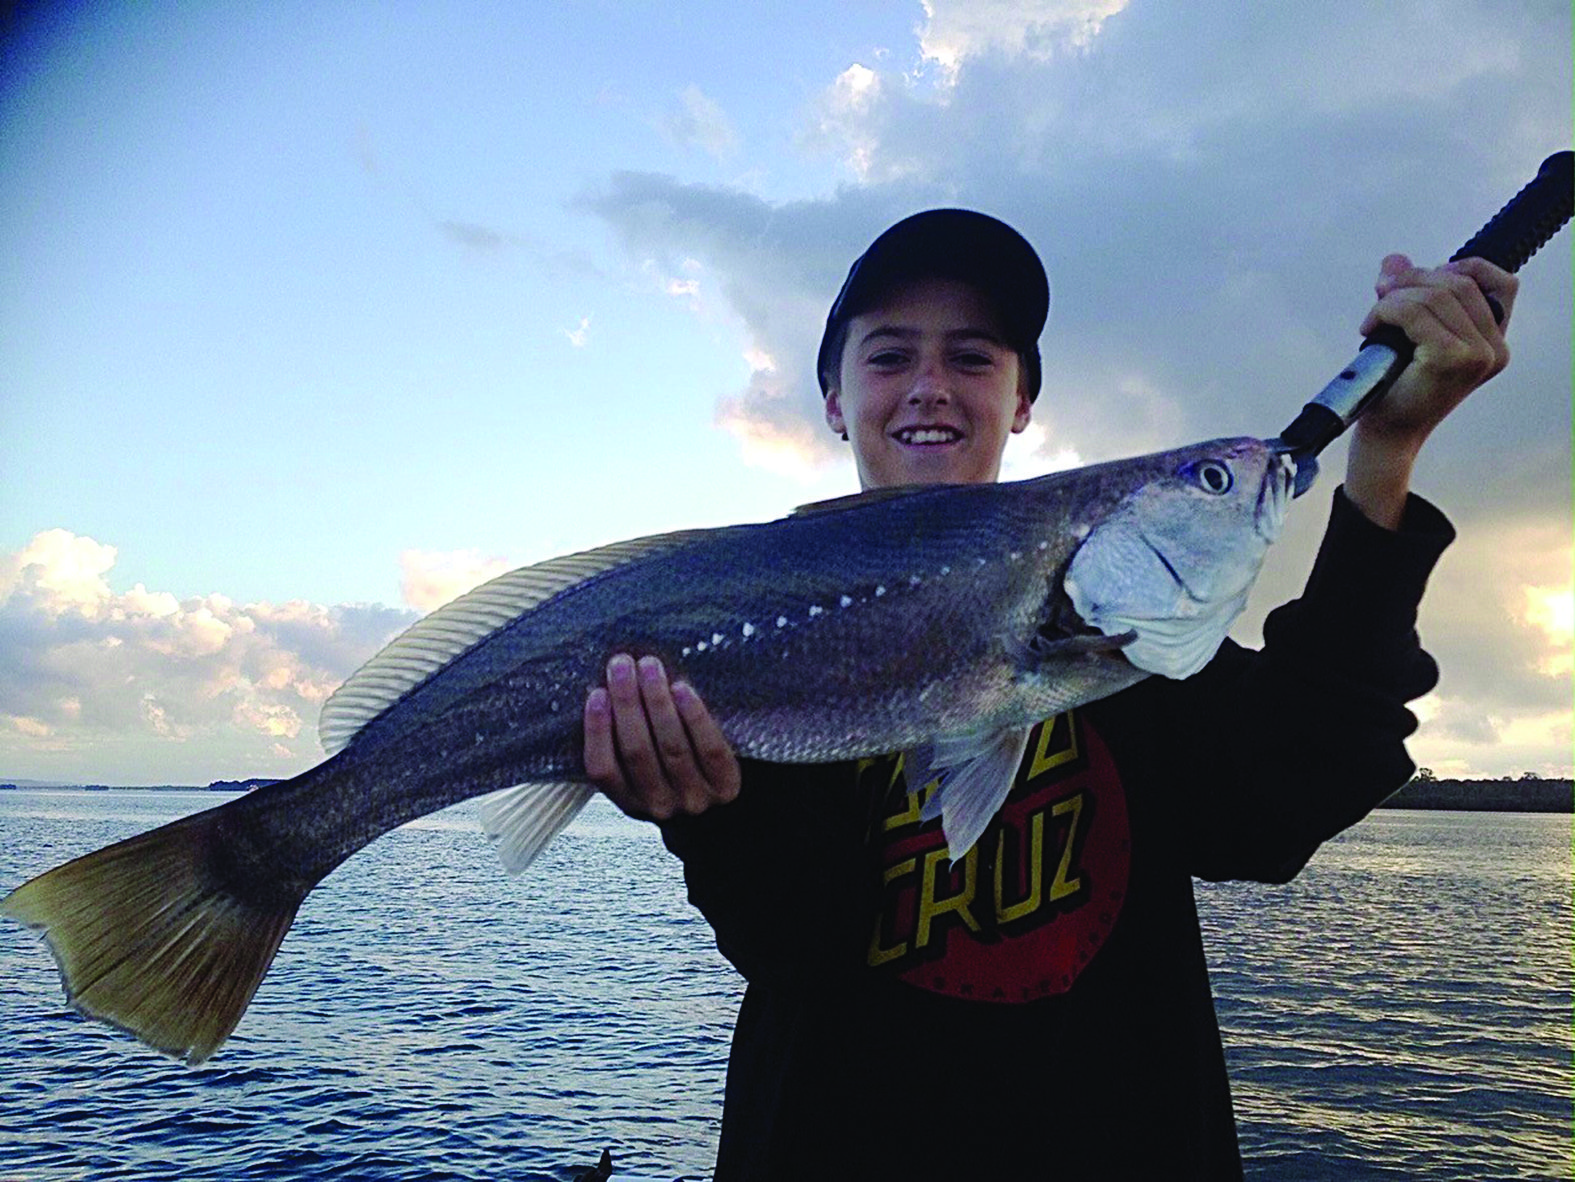 Christian with a lovely Broadwater jew caught during a very early morning trip.